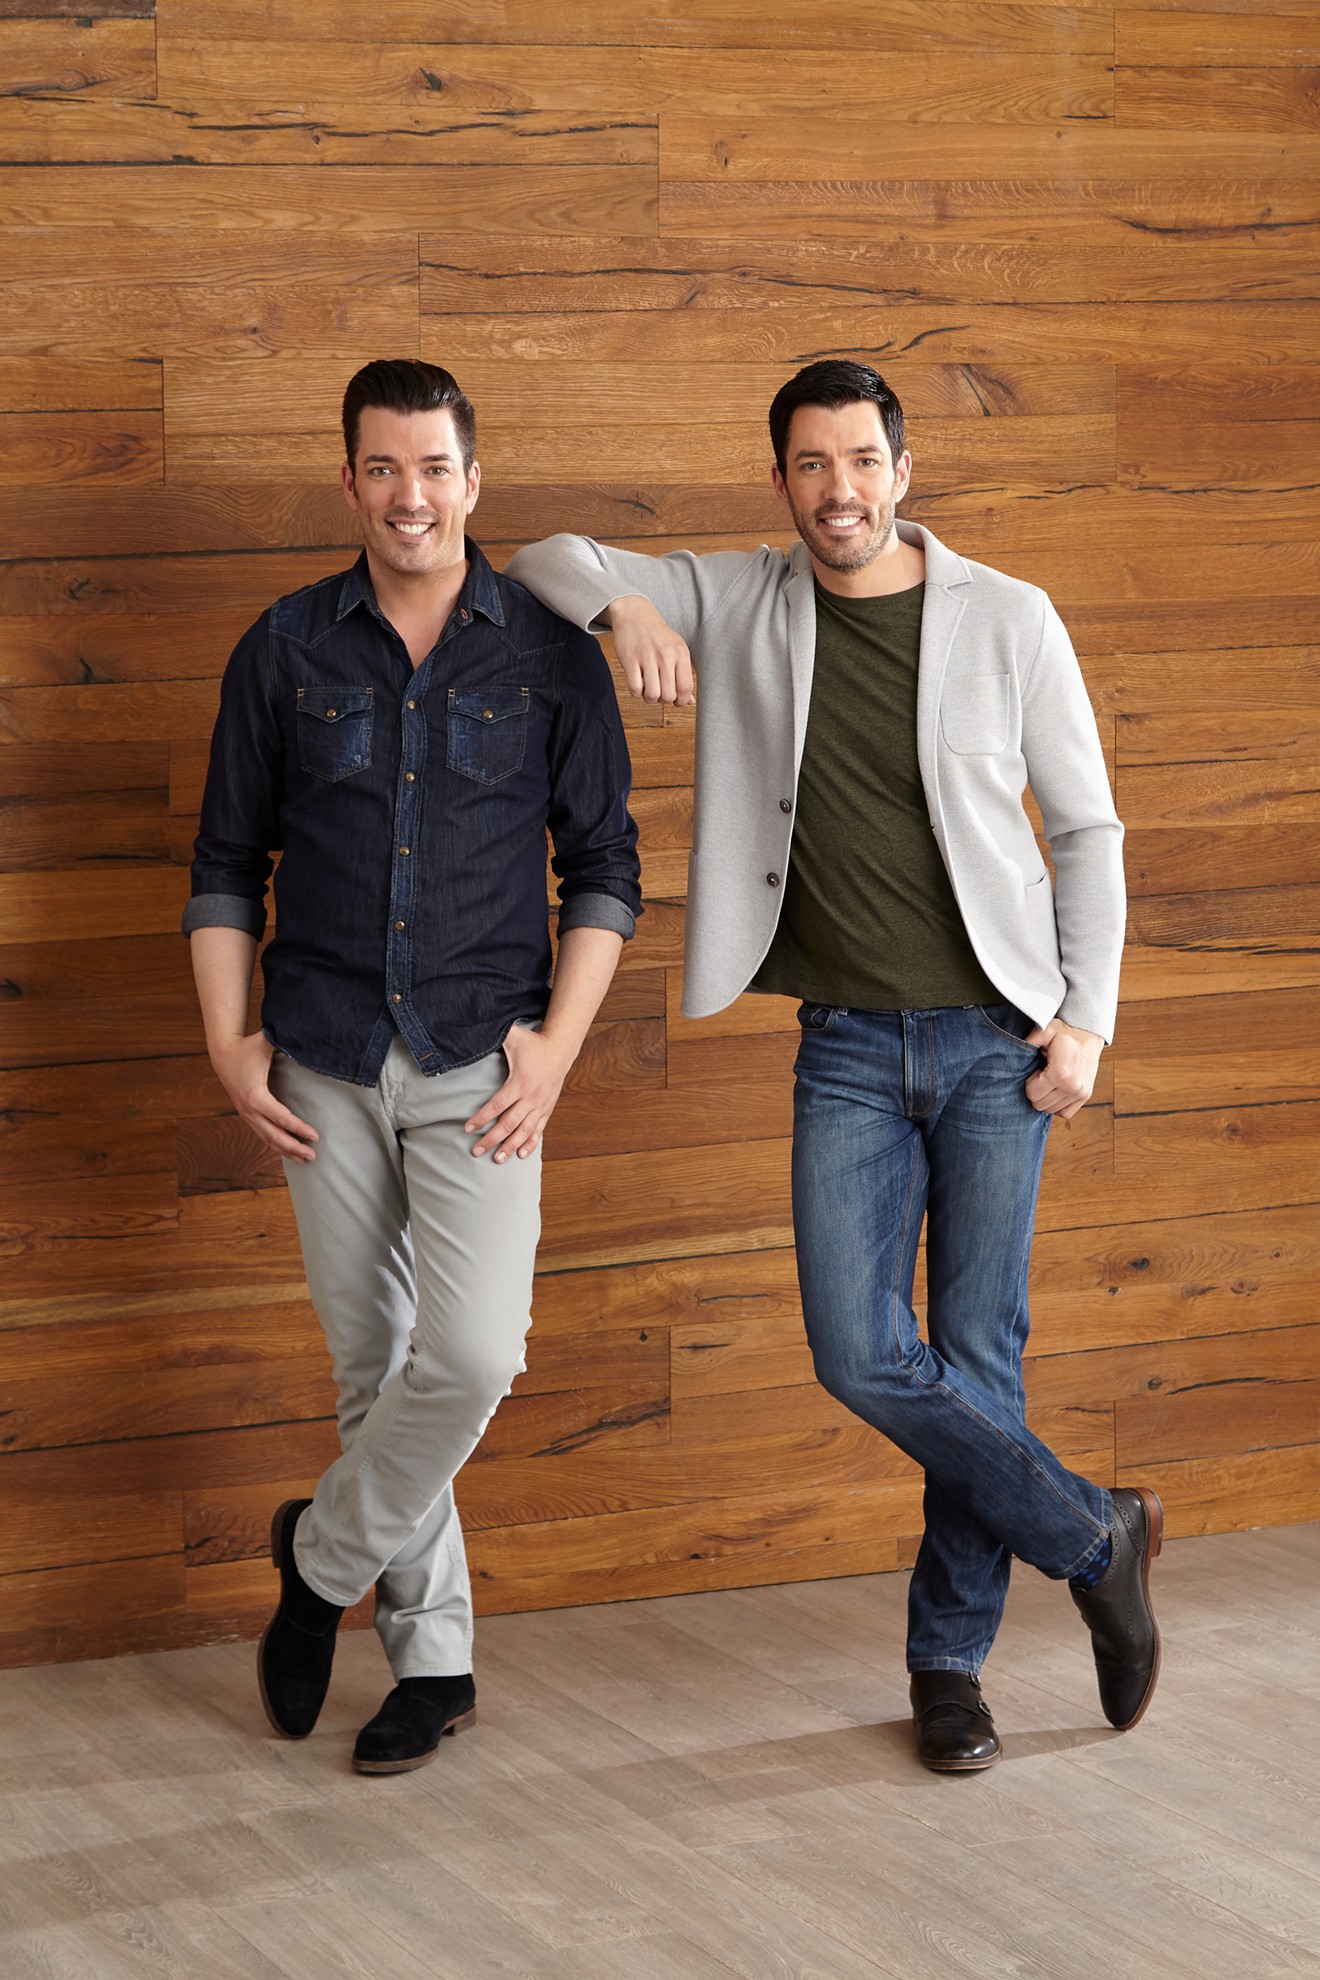 The Property Brothers have written a book.